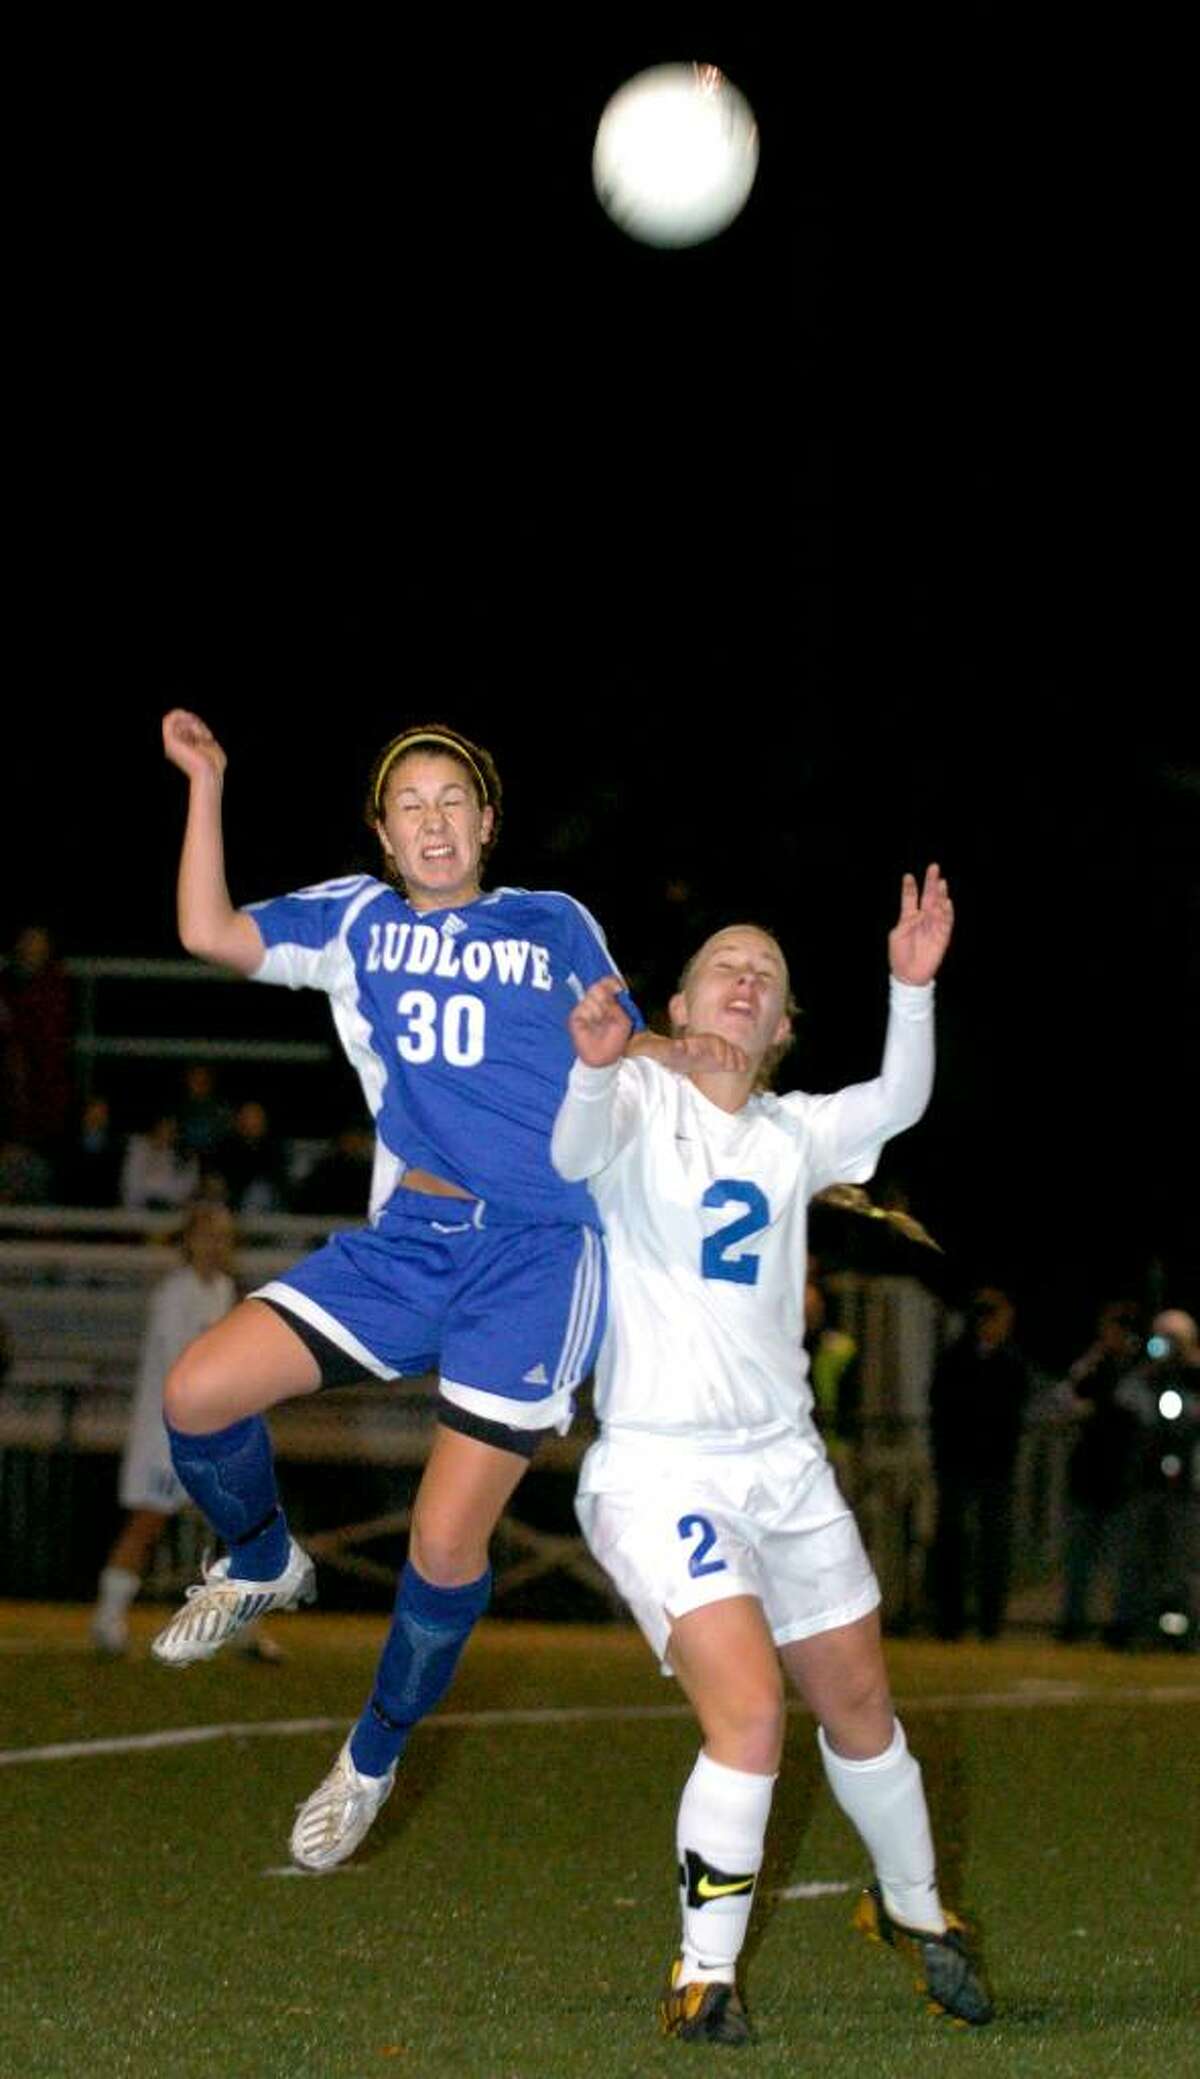 Fairfield Ludlowe's Mary Kamovitch and Glastonbury's Patricia McAllister both go for a header in the second half of Tuesday night's Class L semifinal soccer game at Municipal Stadium in Waterbury.